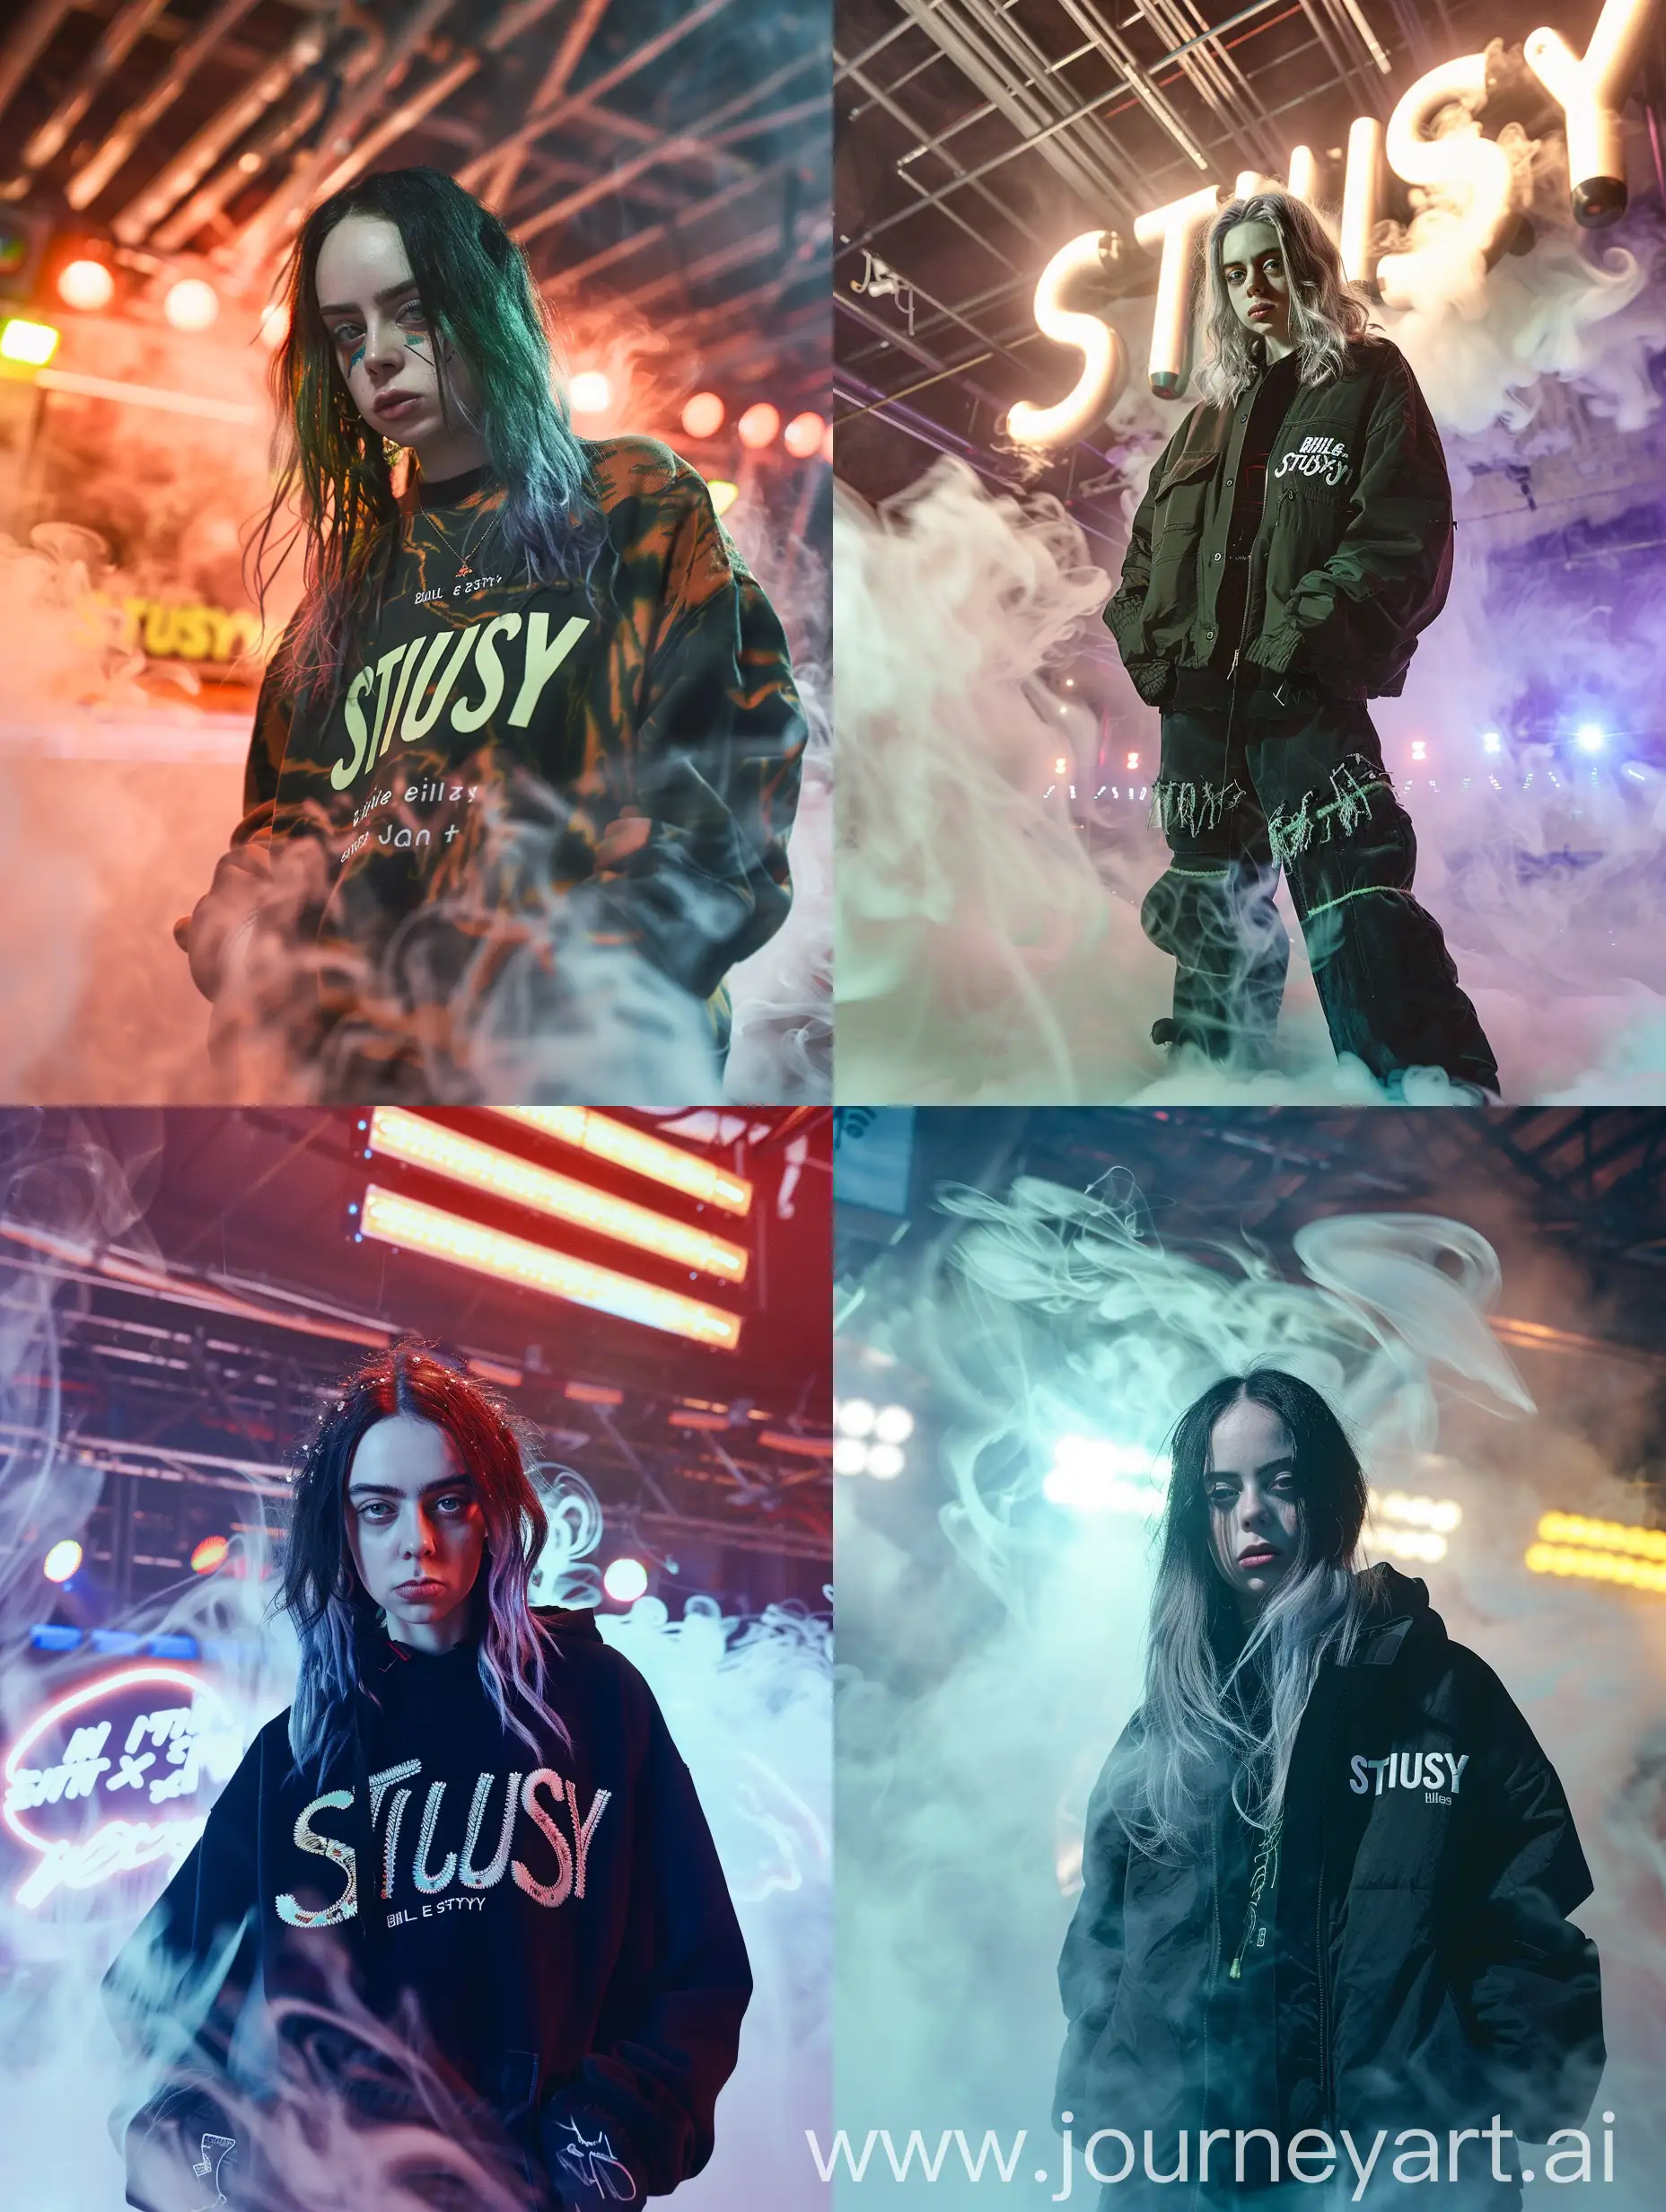 Realistic Photo Side Front Billie Eilish x Stussy Streetwear: Amidst the pulsating lights of an underground club, Billie Eilish embodies downtown cool and futuristic allure. Dynamic photography captures the surrealism of Stussy streetwear in motion, with hyper-realistic details like embroidery zoom and inflatable technical textile. The scene is enveloped in swirling smoke, showcasing Eilish's edgy attitude and effortless style.